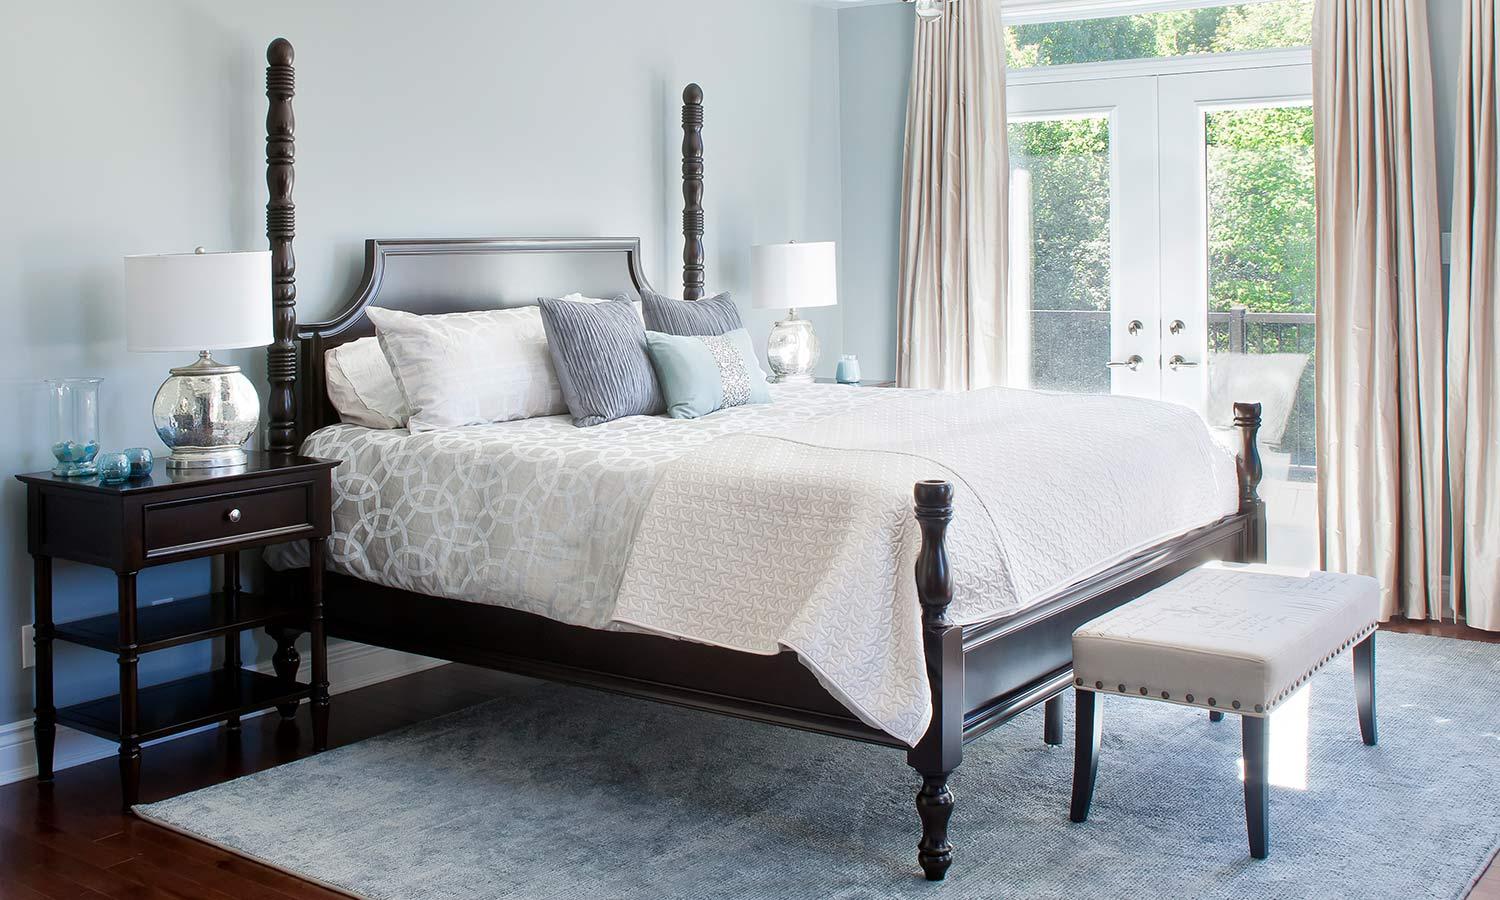 75 Different Types of Beds for Every Style | Casper Blog